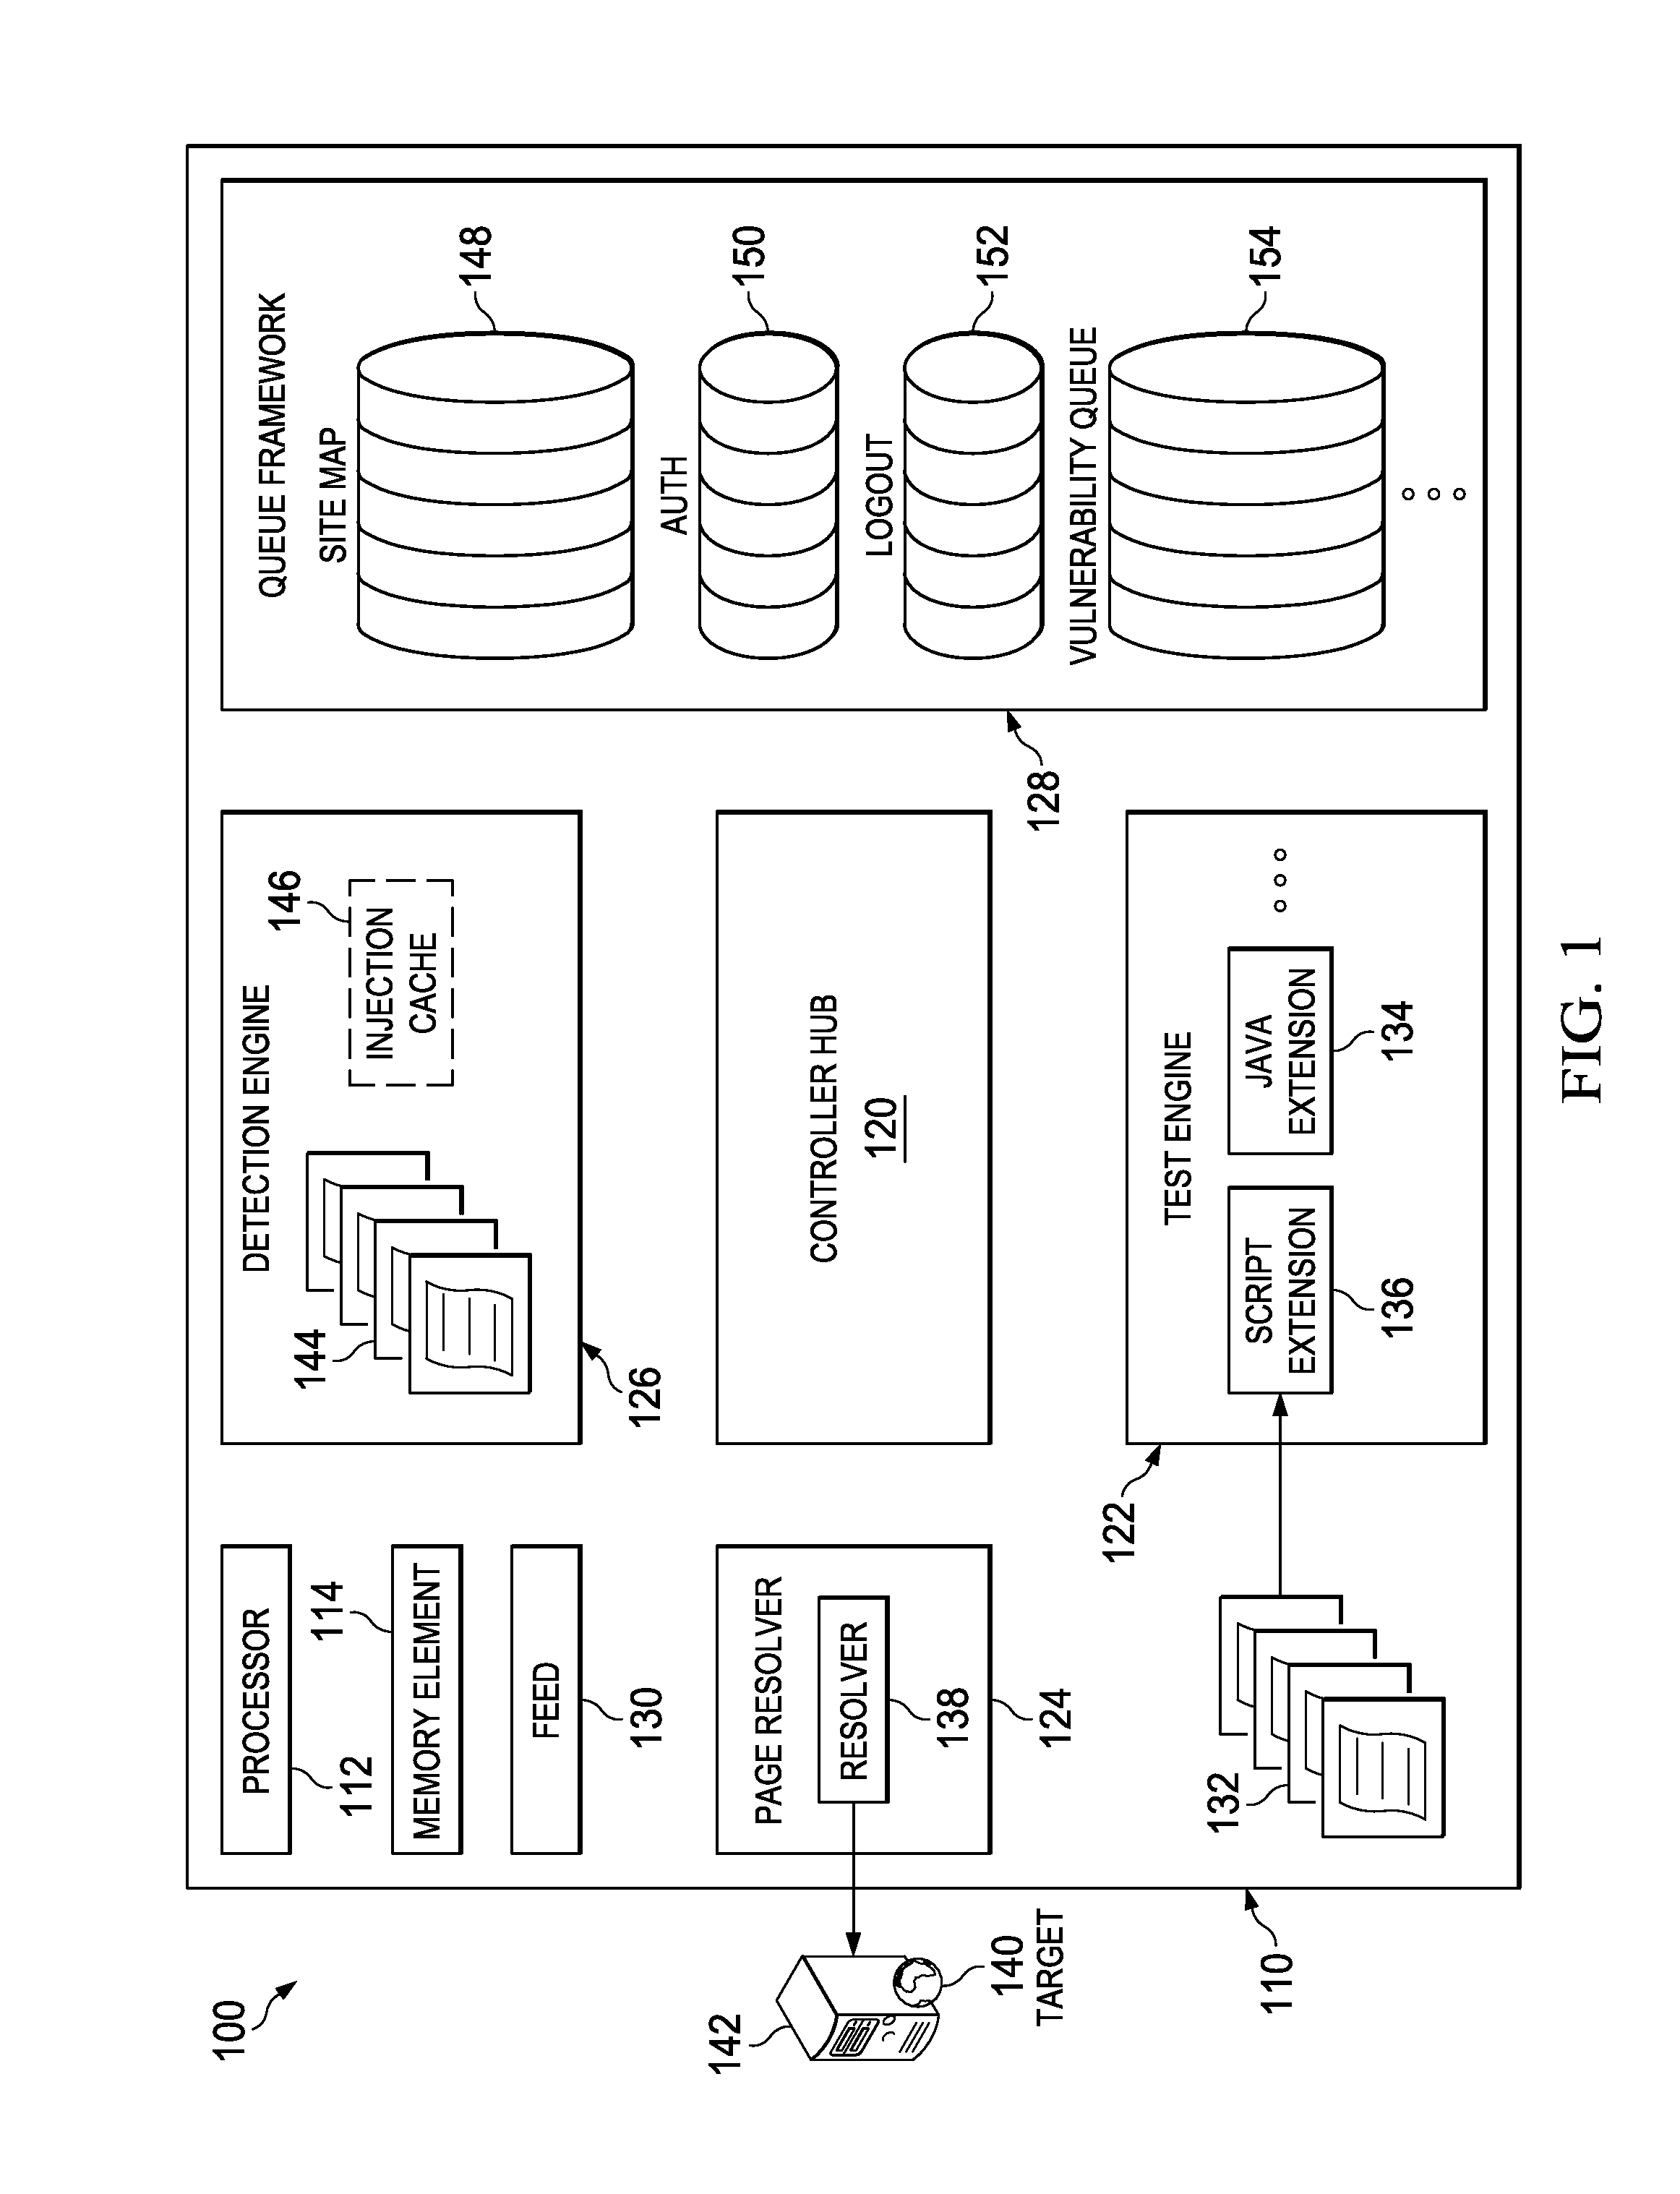 System and method for application security assessment